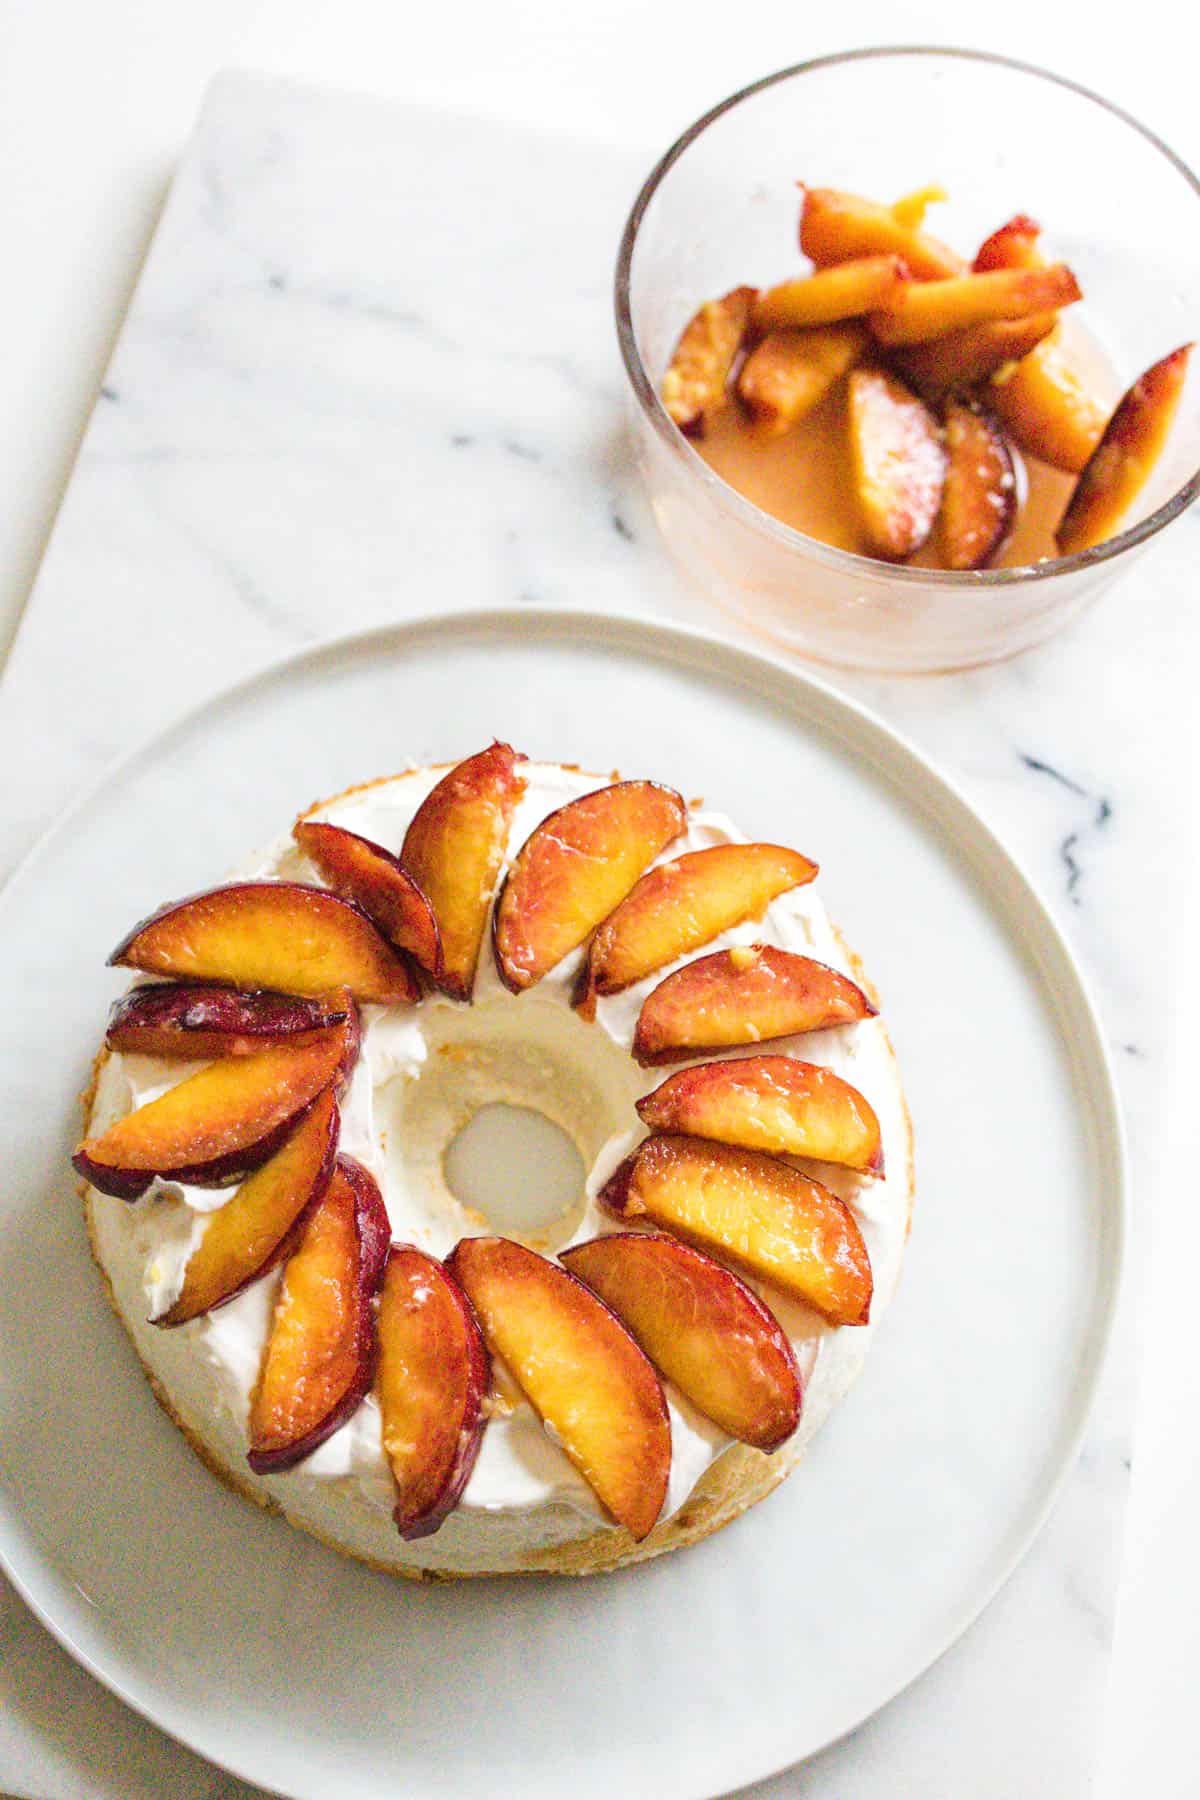 Sliced peaches laying in a pattern on top of a half of angel food cake.